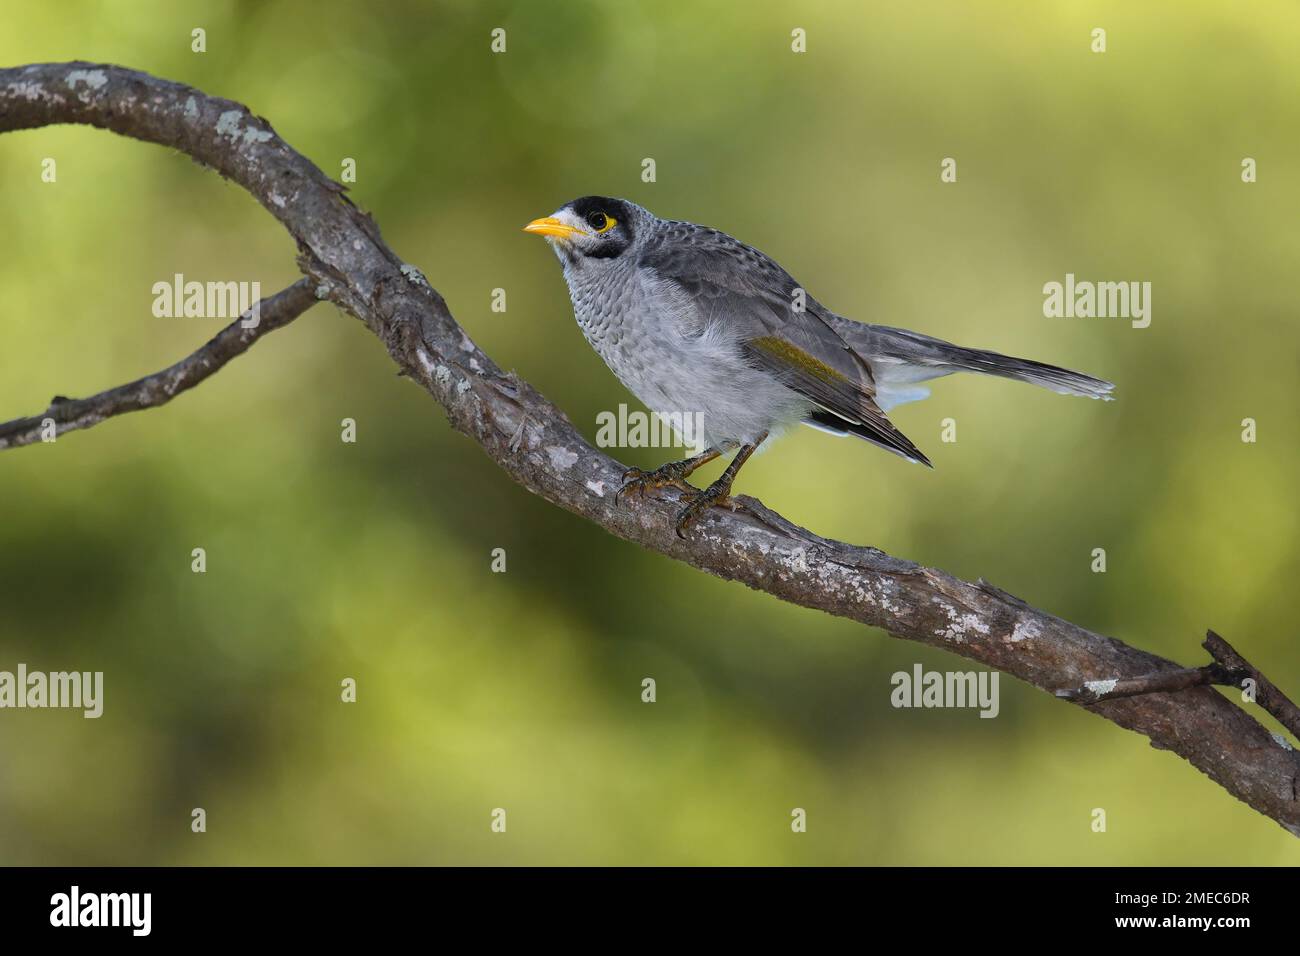 An Australian Noisy Miner -Manorina melanocephala- bird perched on a tree branch in colourful soft early morning light looking for food Stock Photo